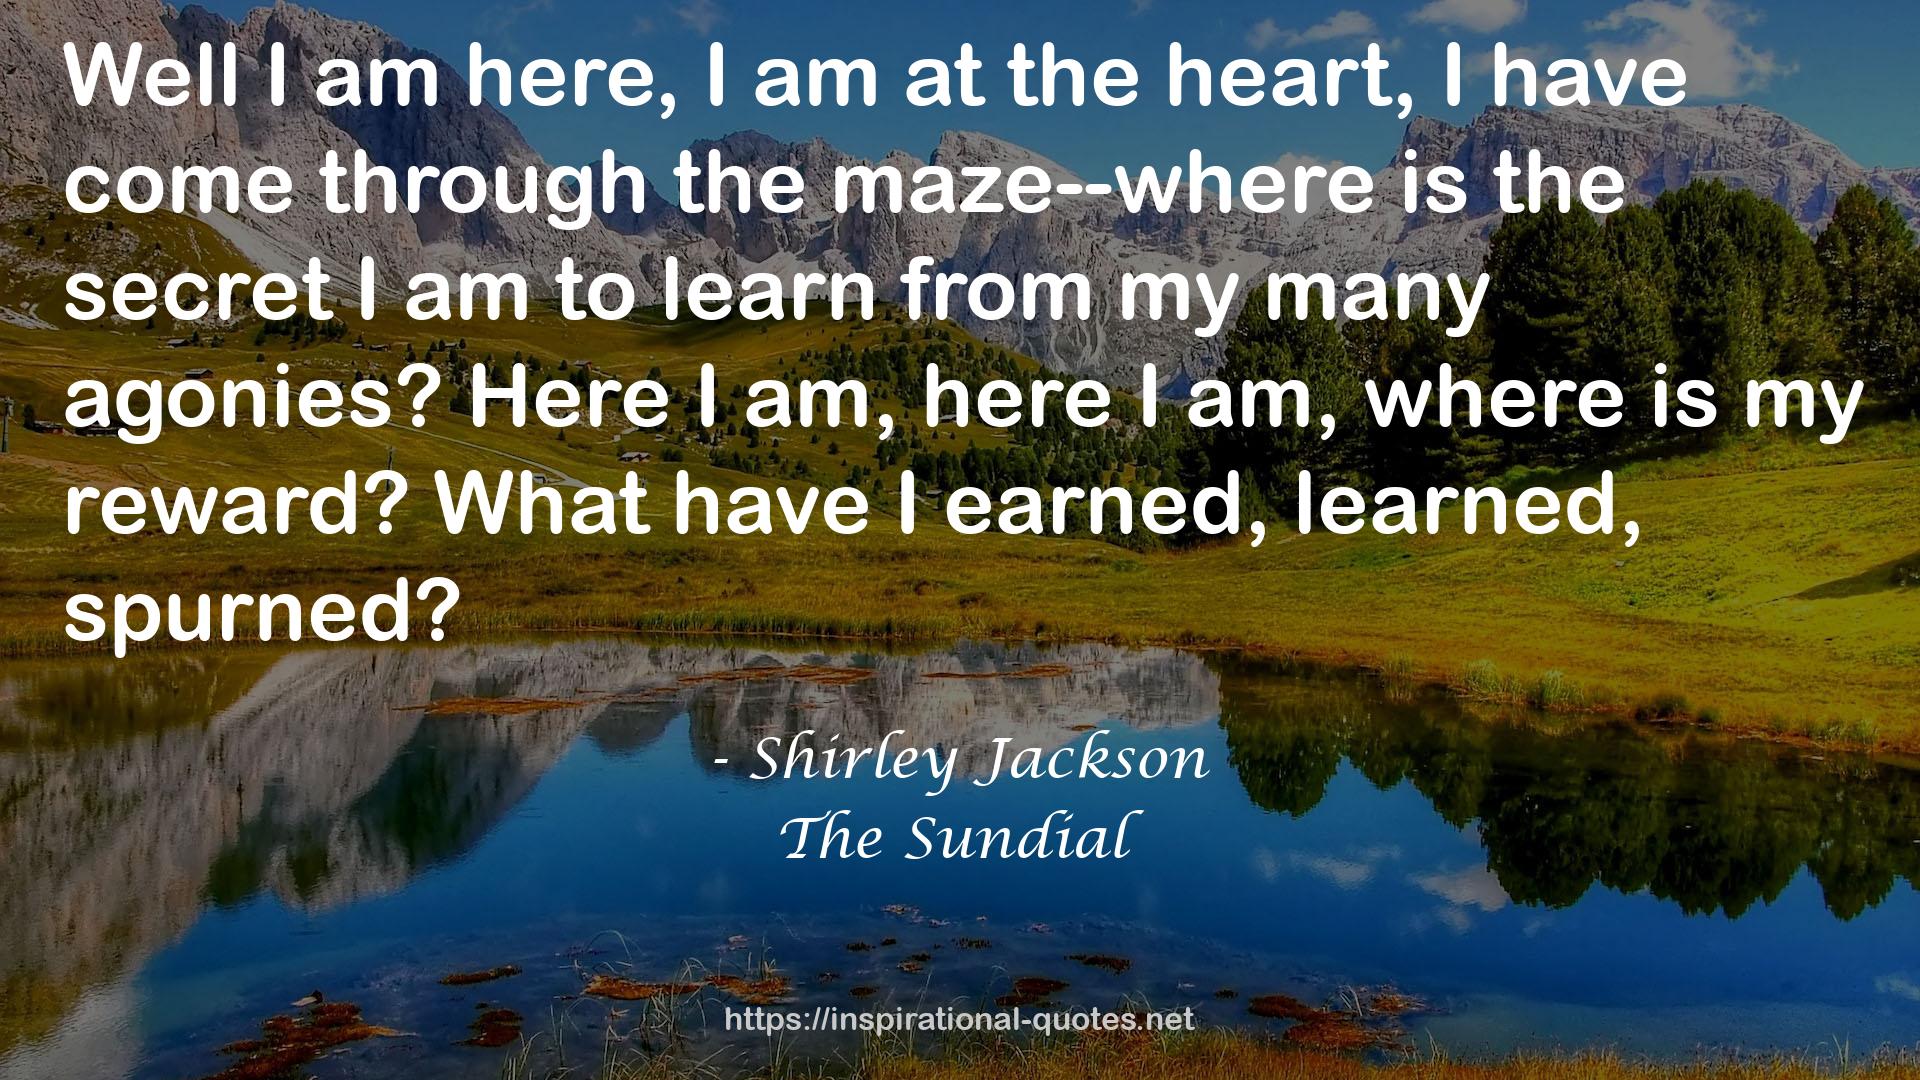 The Sundial QUOTES